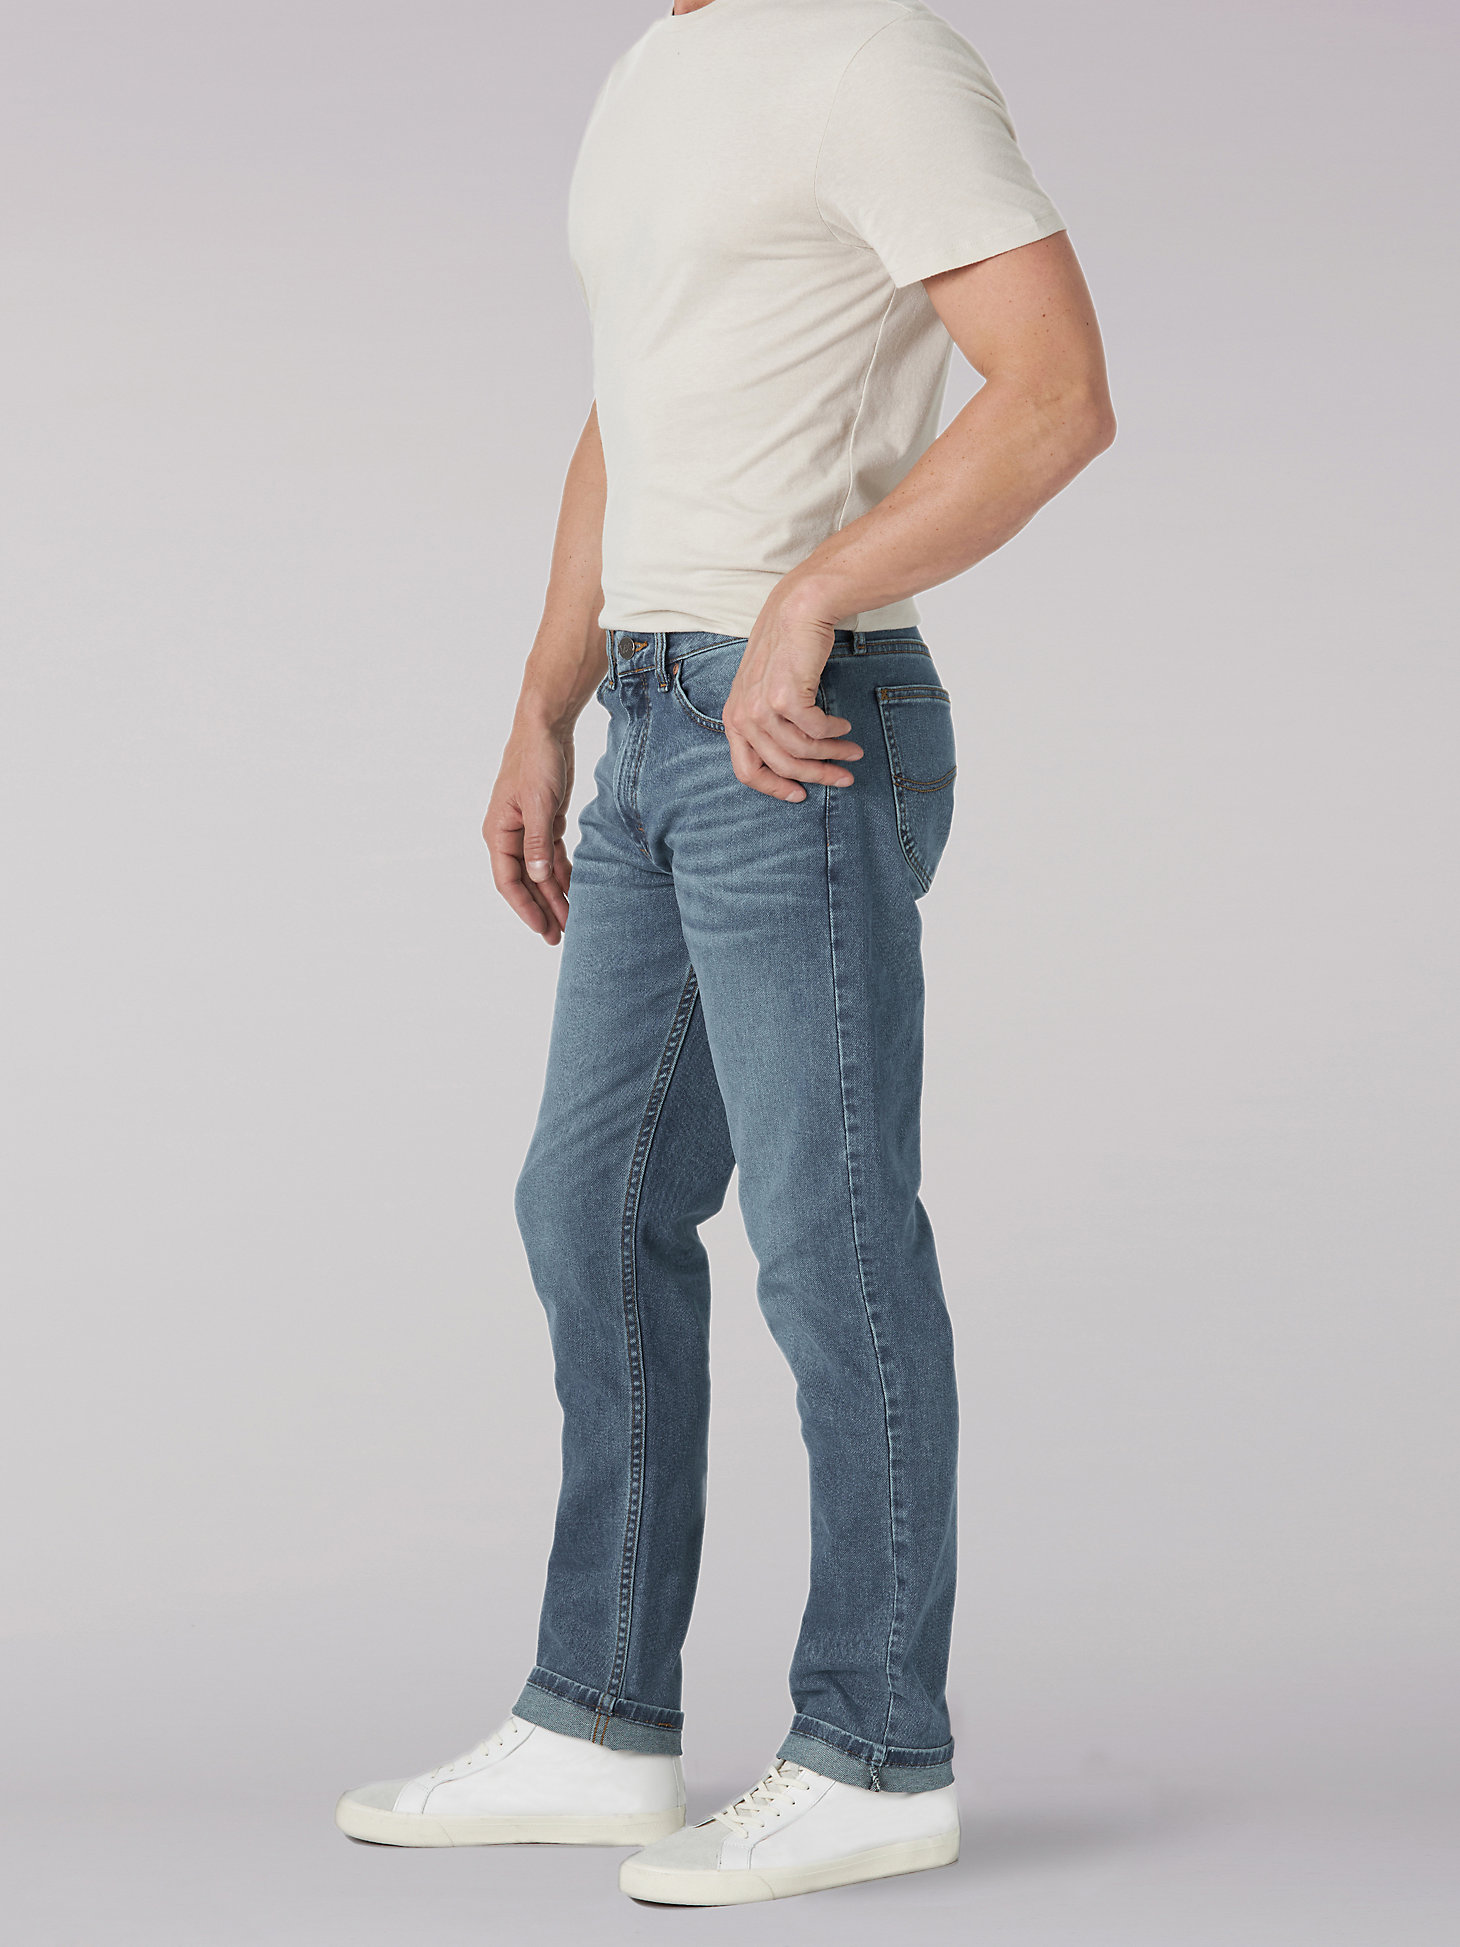 Men's Legendary Athletic Tapered Jean in Cruise alternative view 2